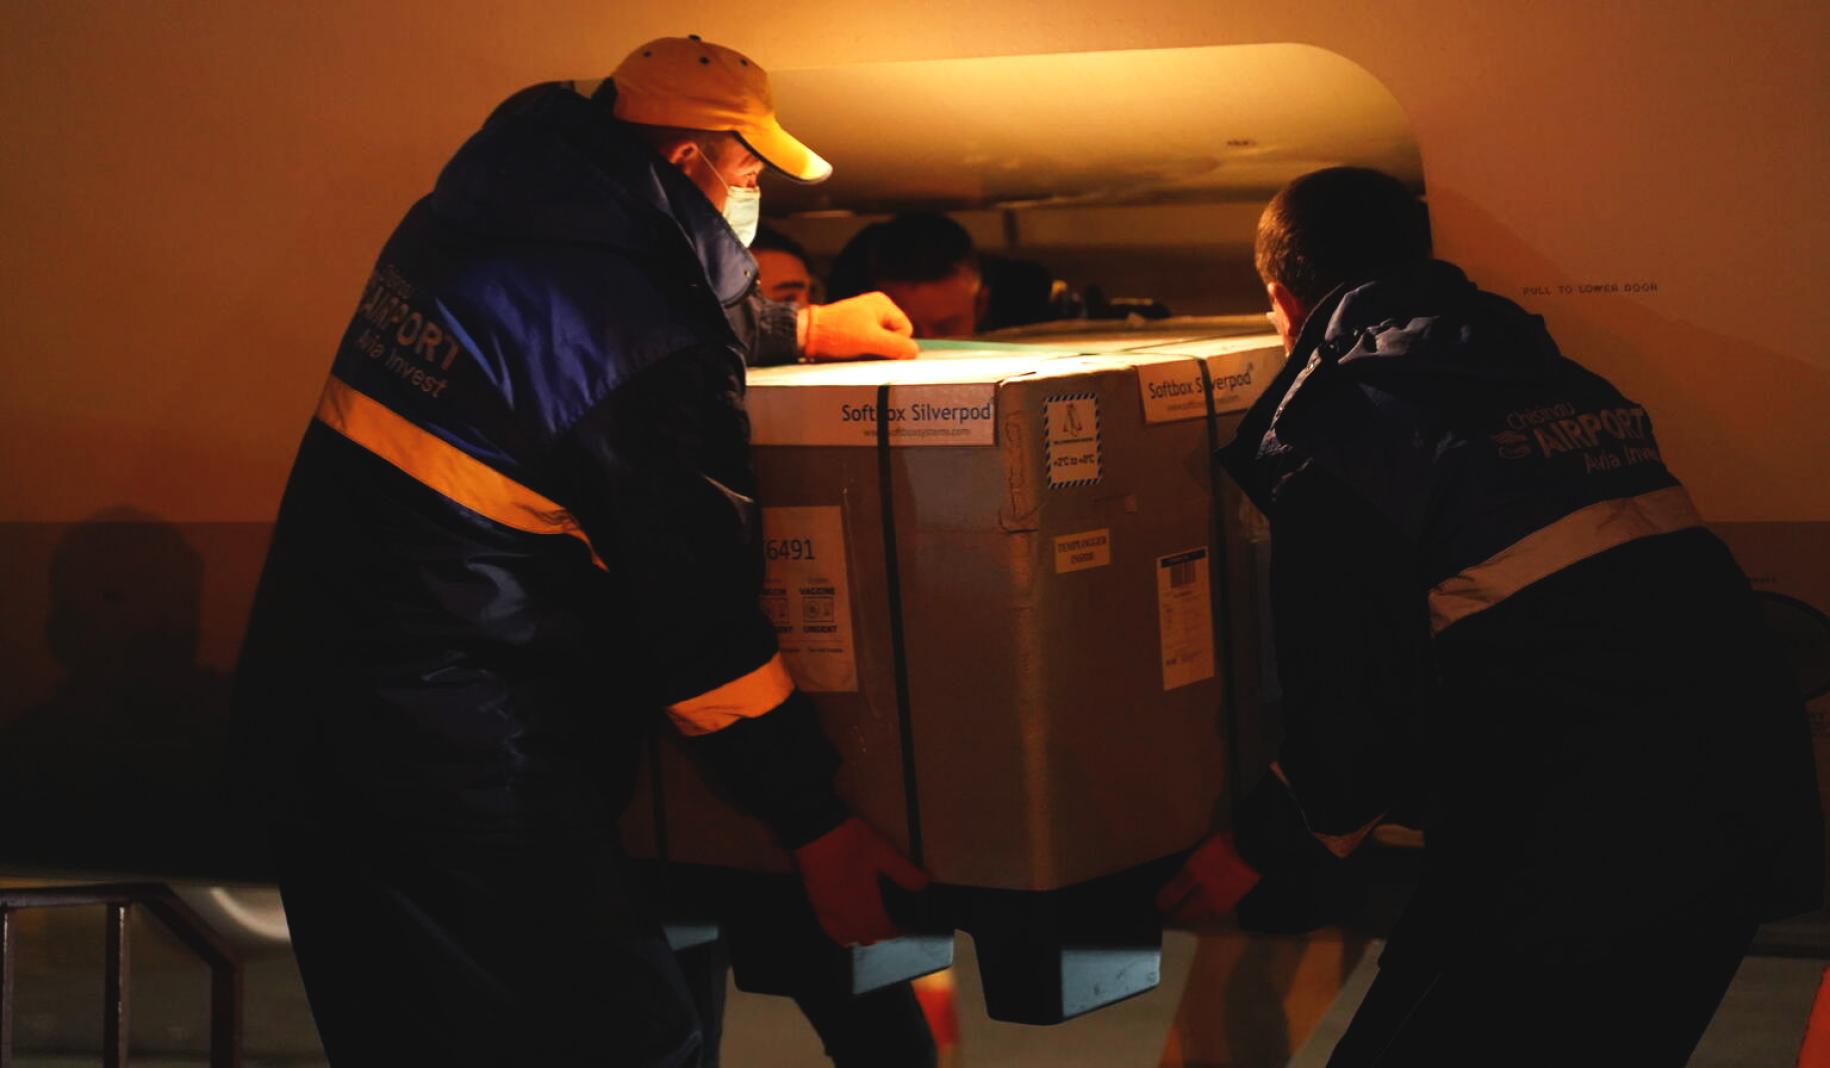 Two airport employees unload a crate of vaccines from the plane's cargo space.